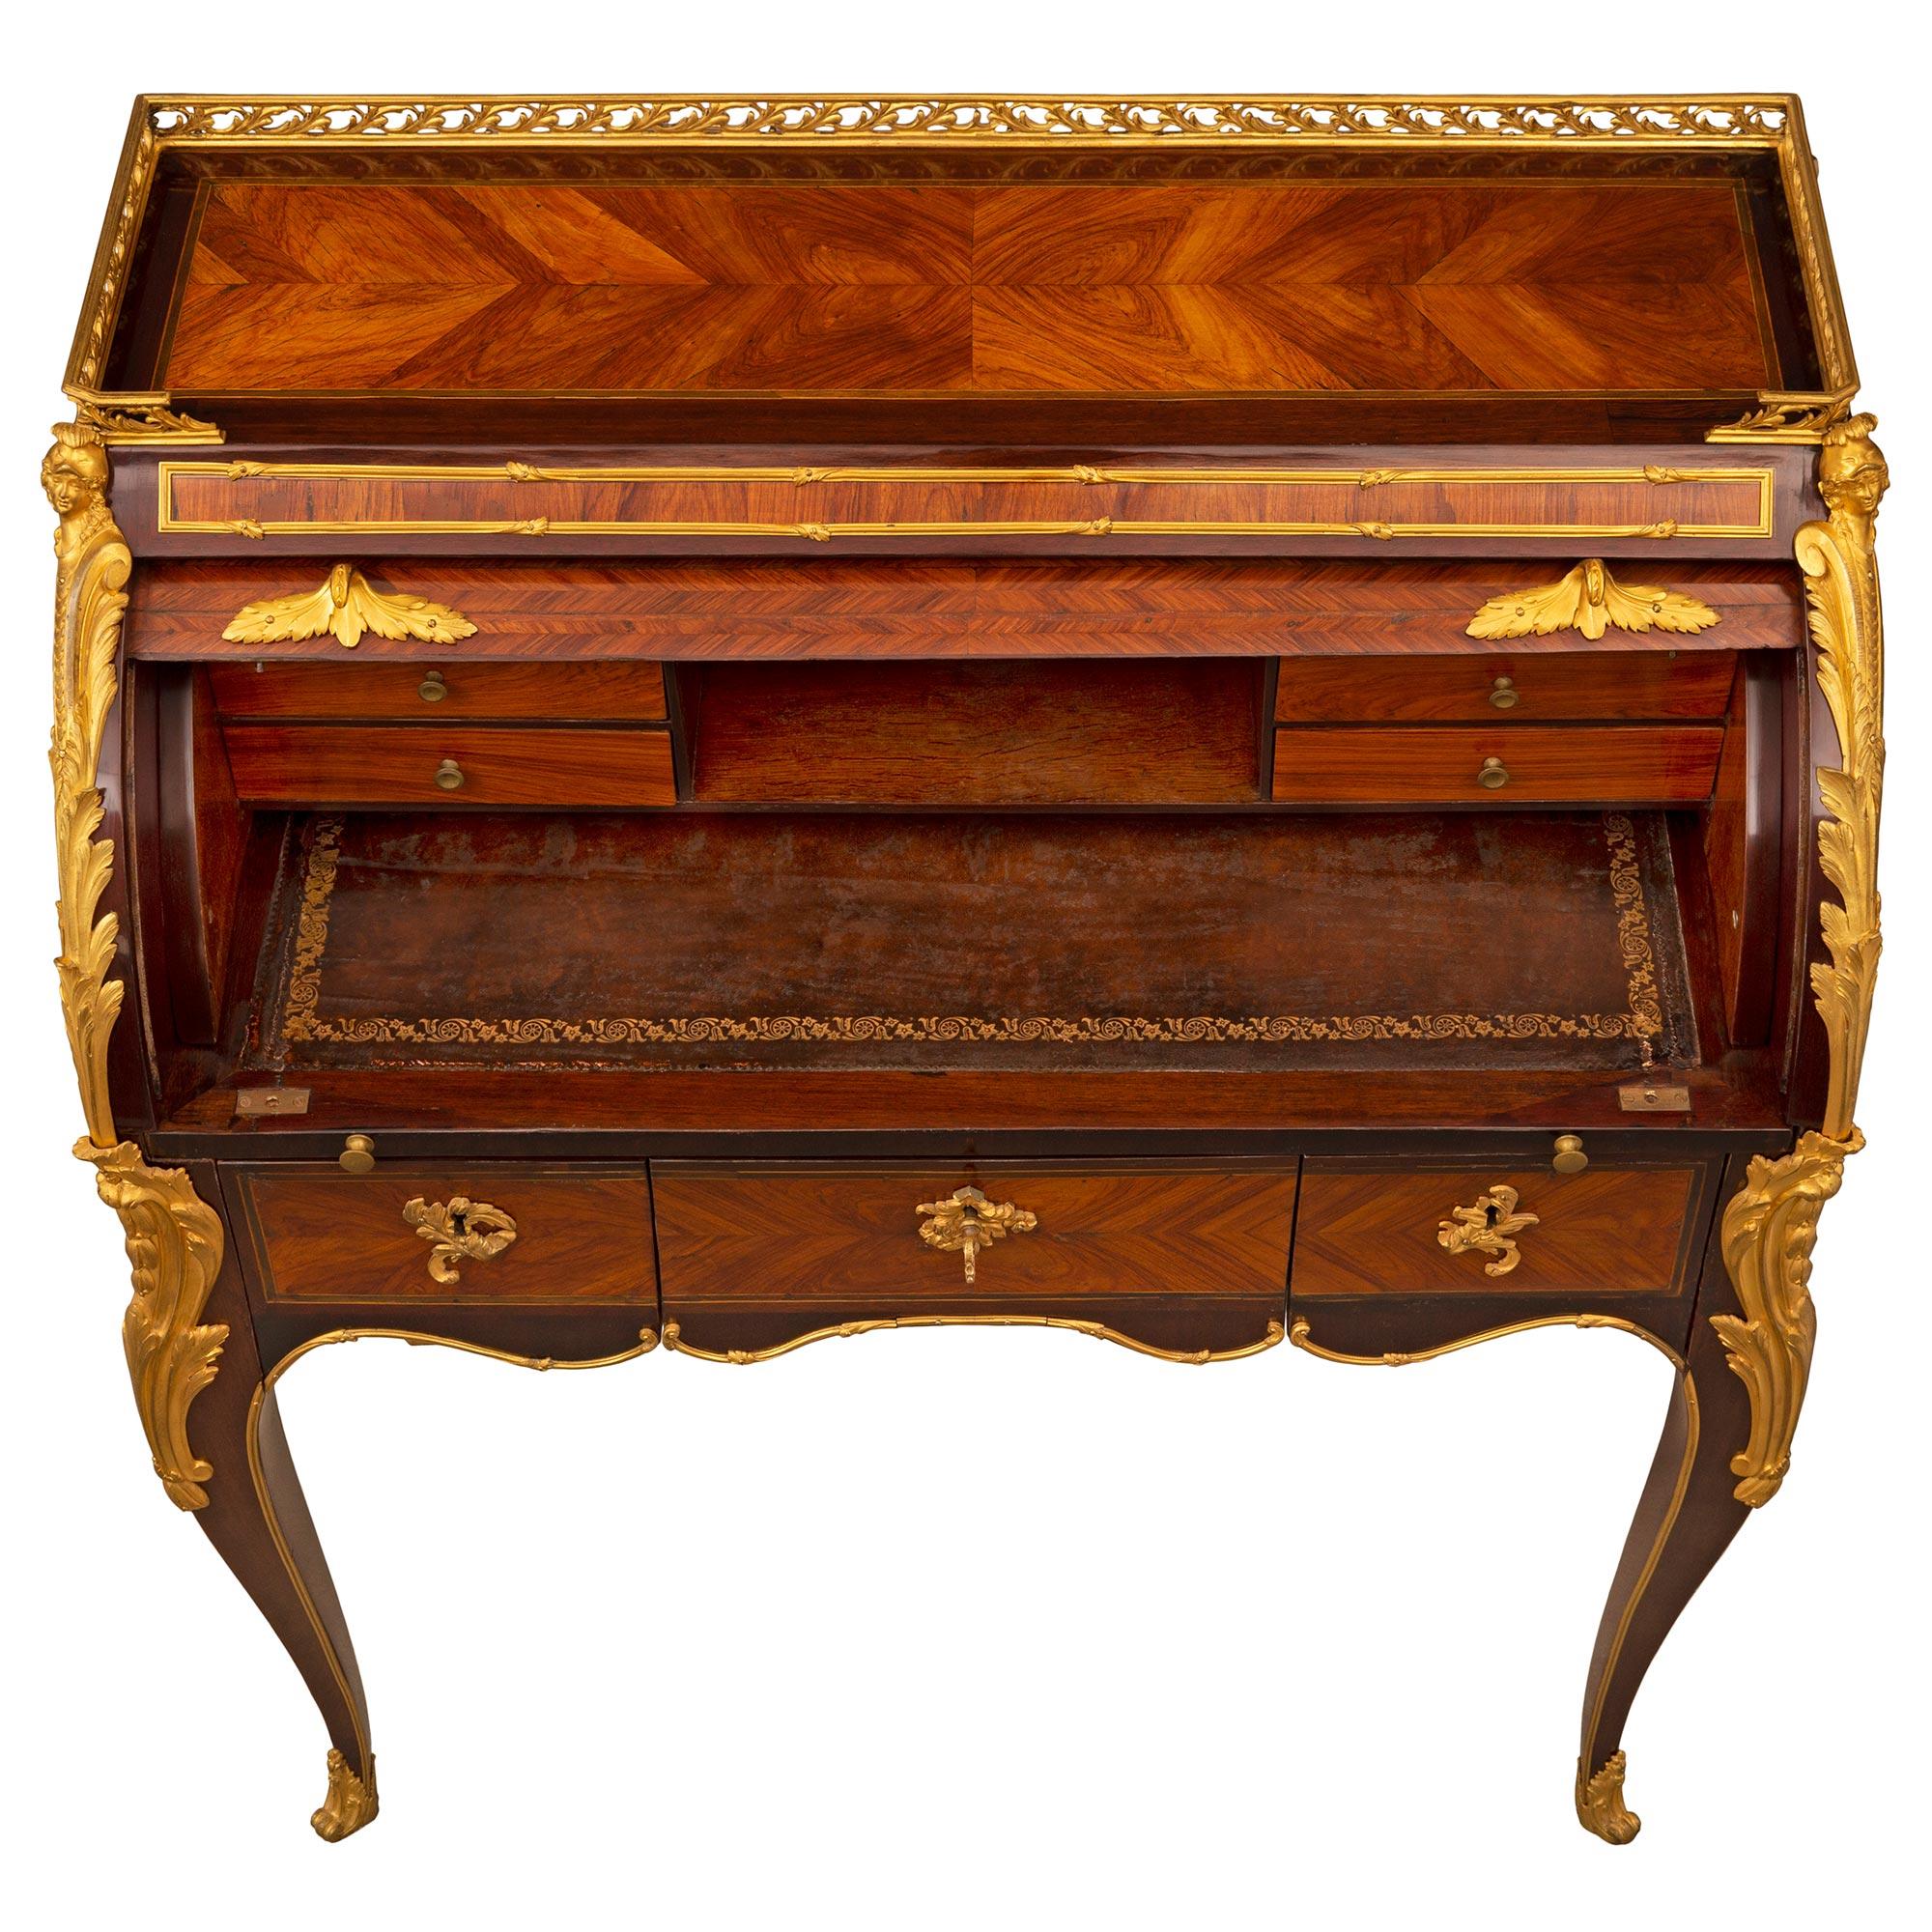 French 18th Century Louis XV Period Kingwood, Tulipwood and Ormolu Desk For Sale 2